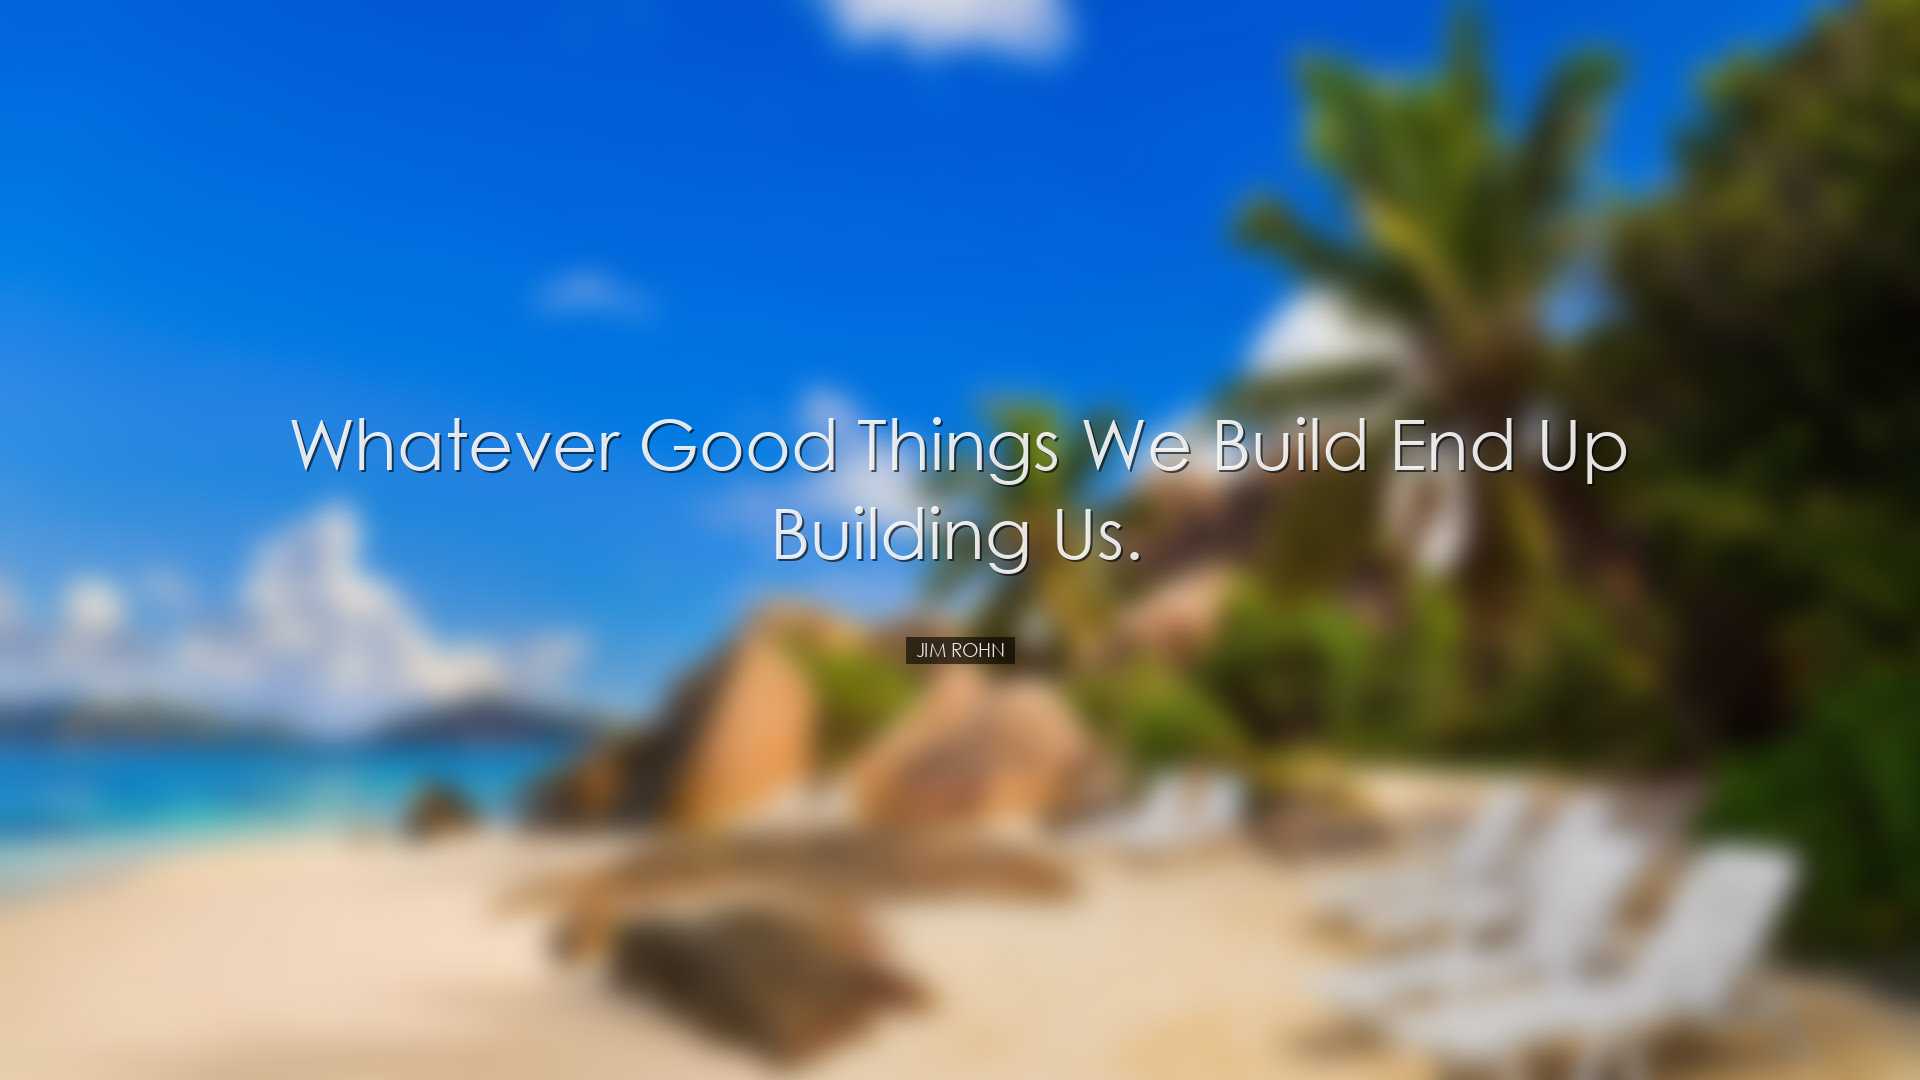 Whatever good things we build end up building us. - Jim Rohn